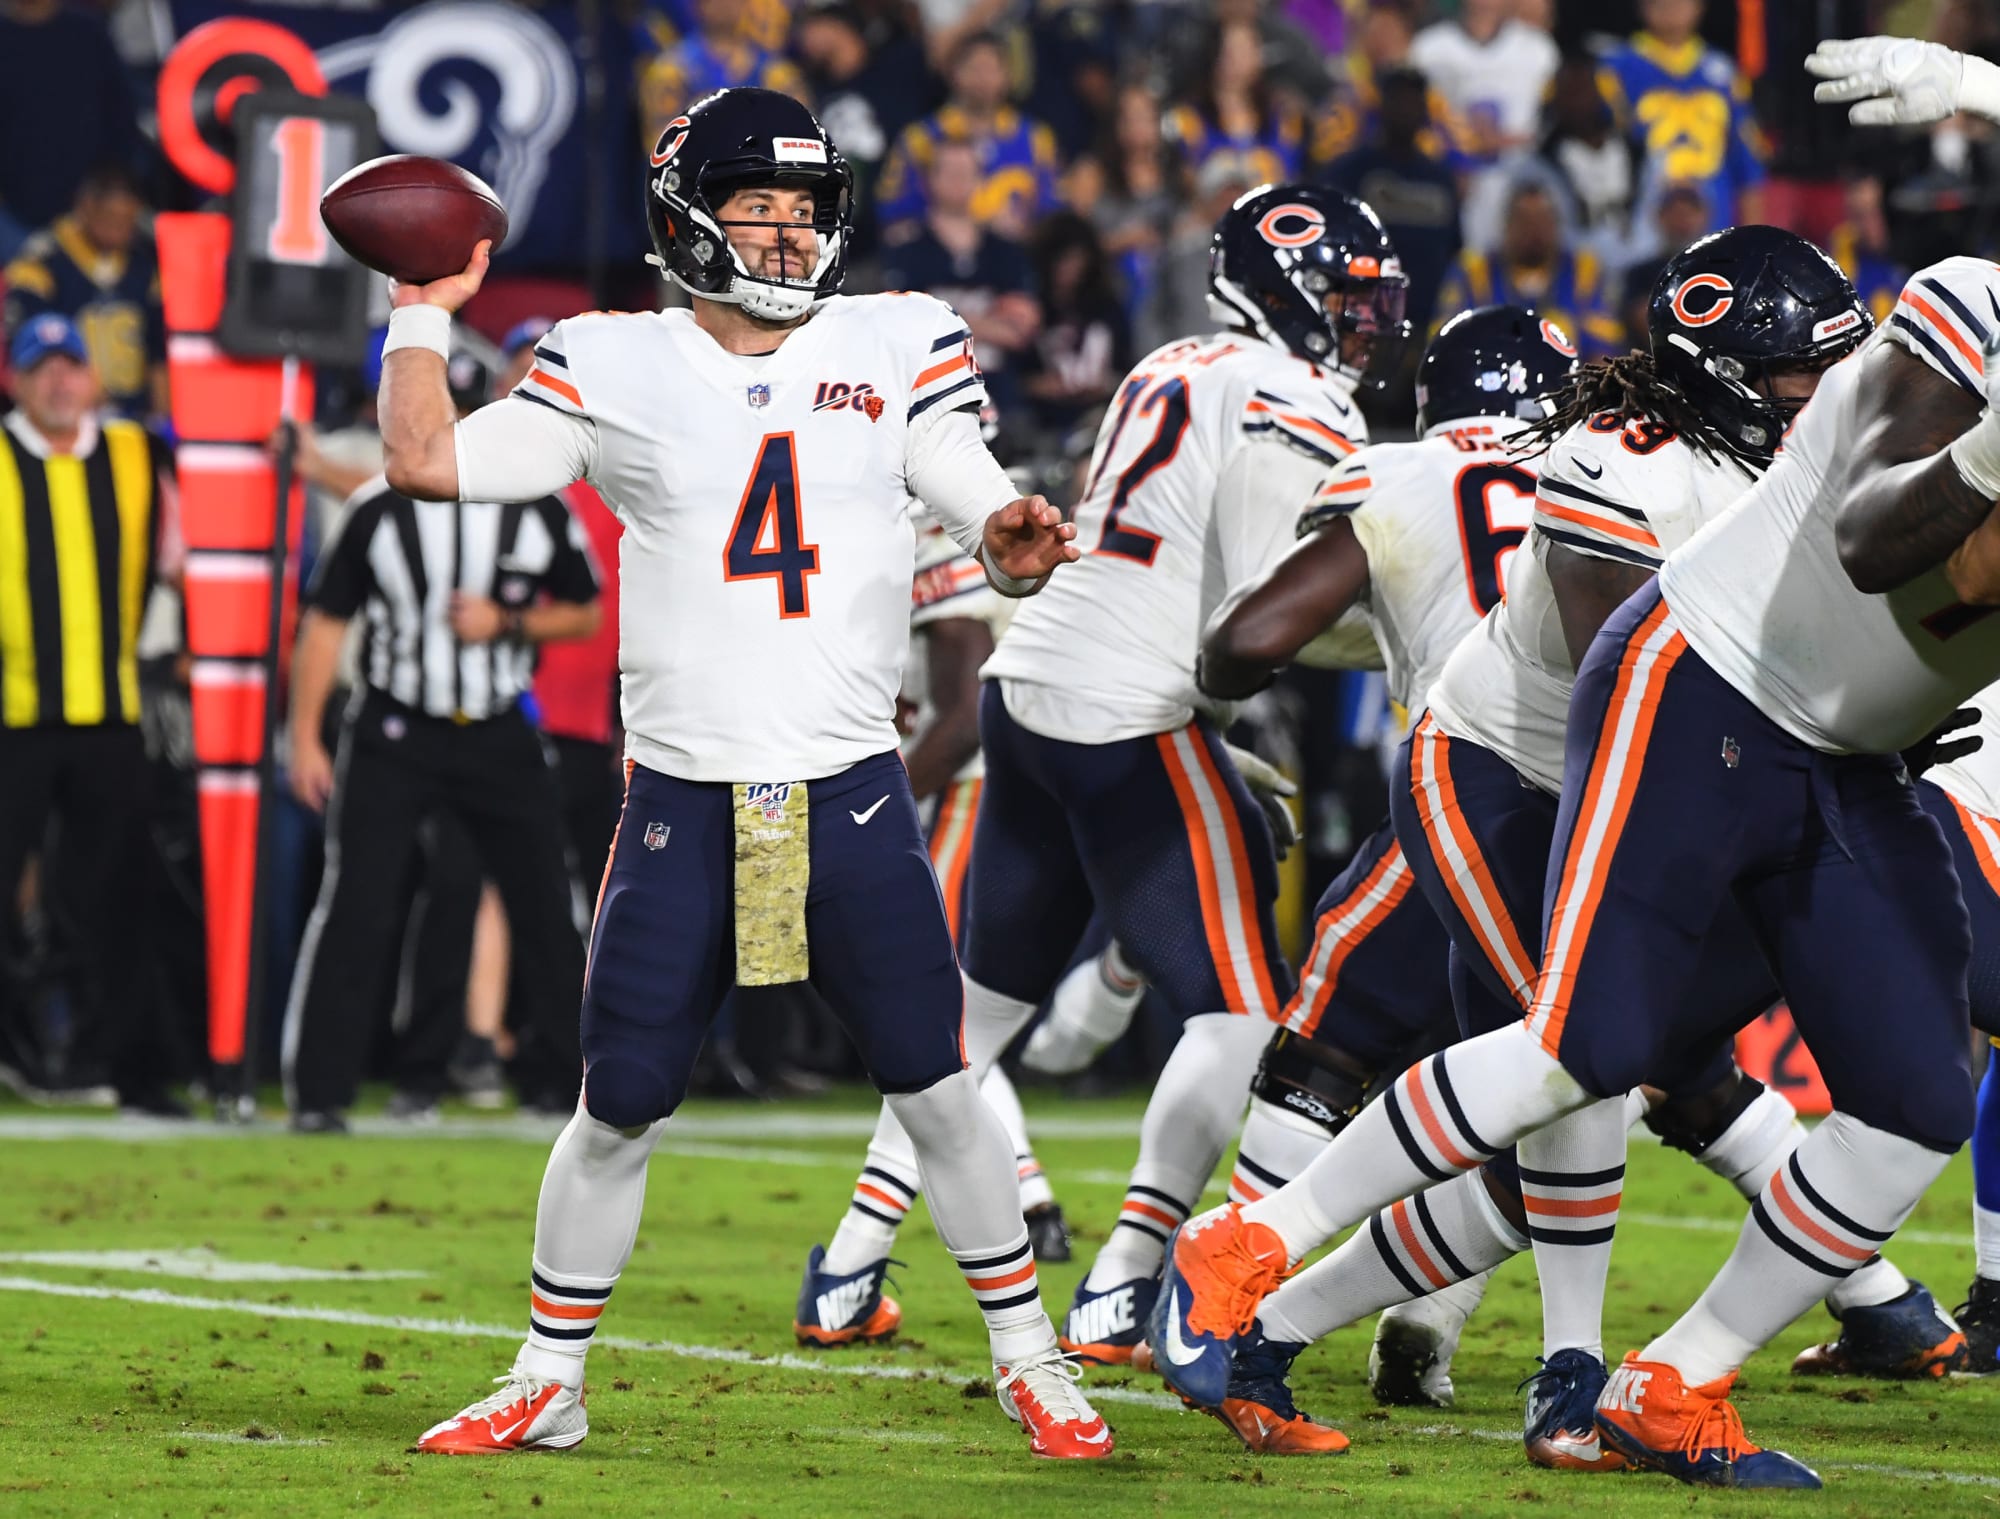 Is Chase Daniel the new Chicago Bears starting quarterback?